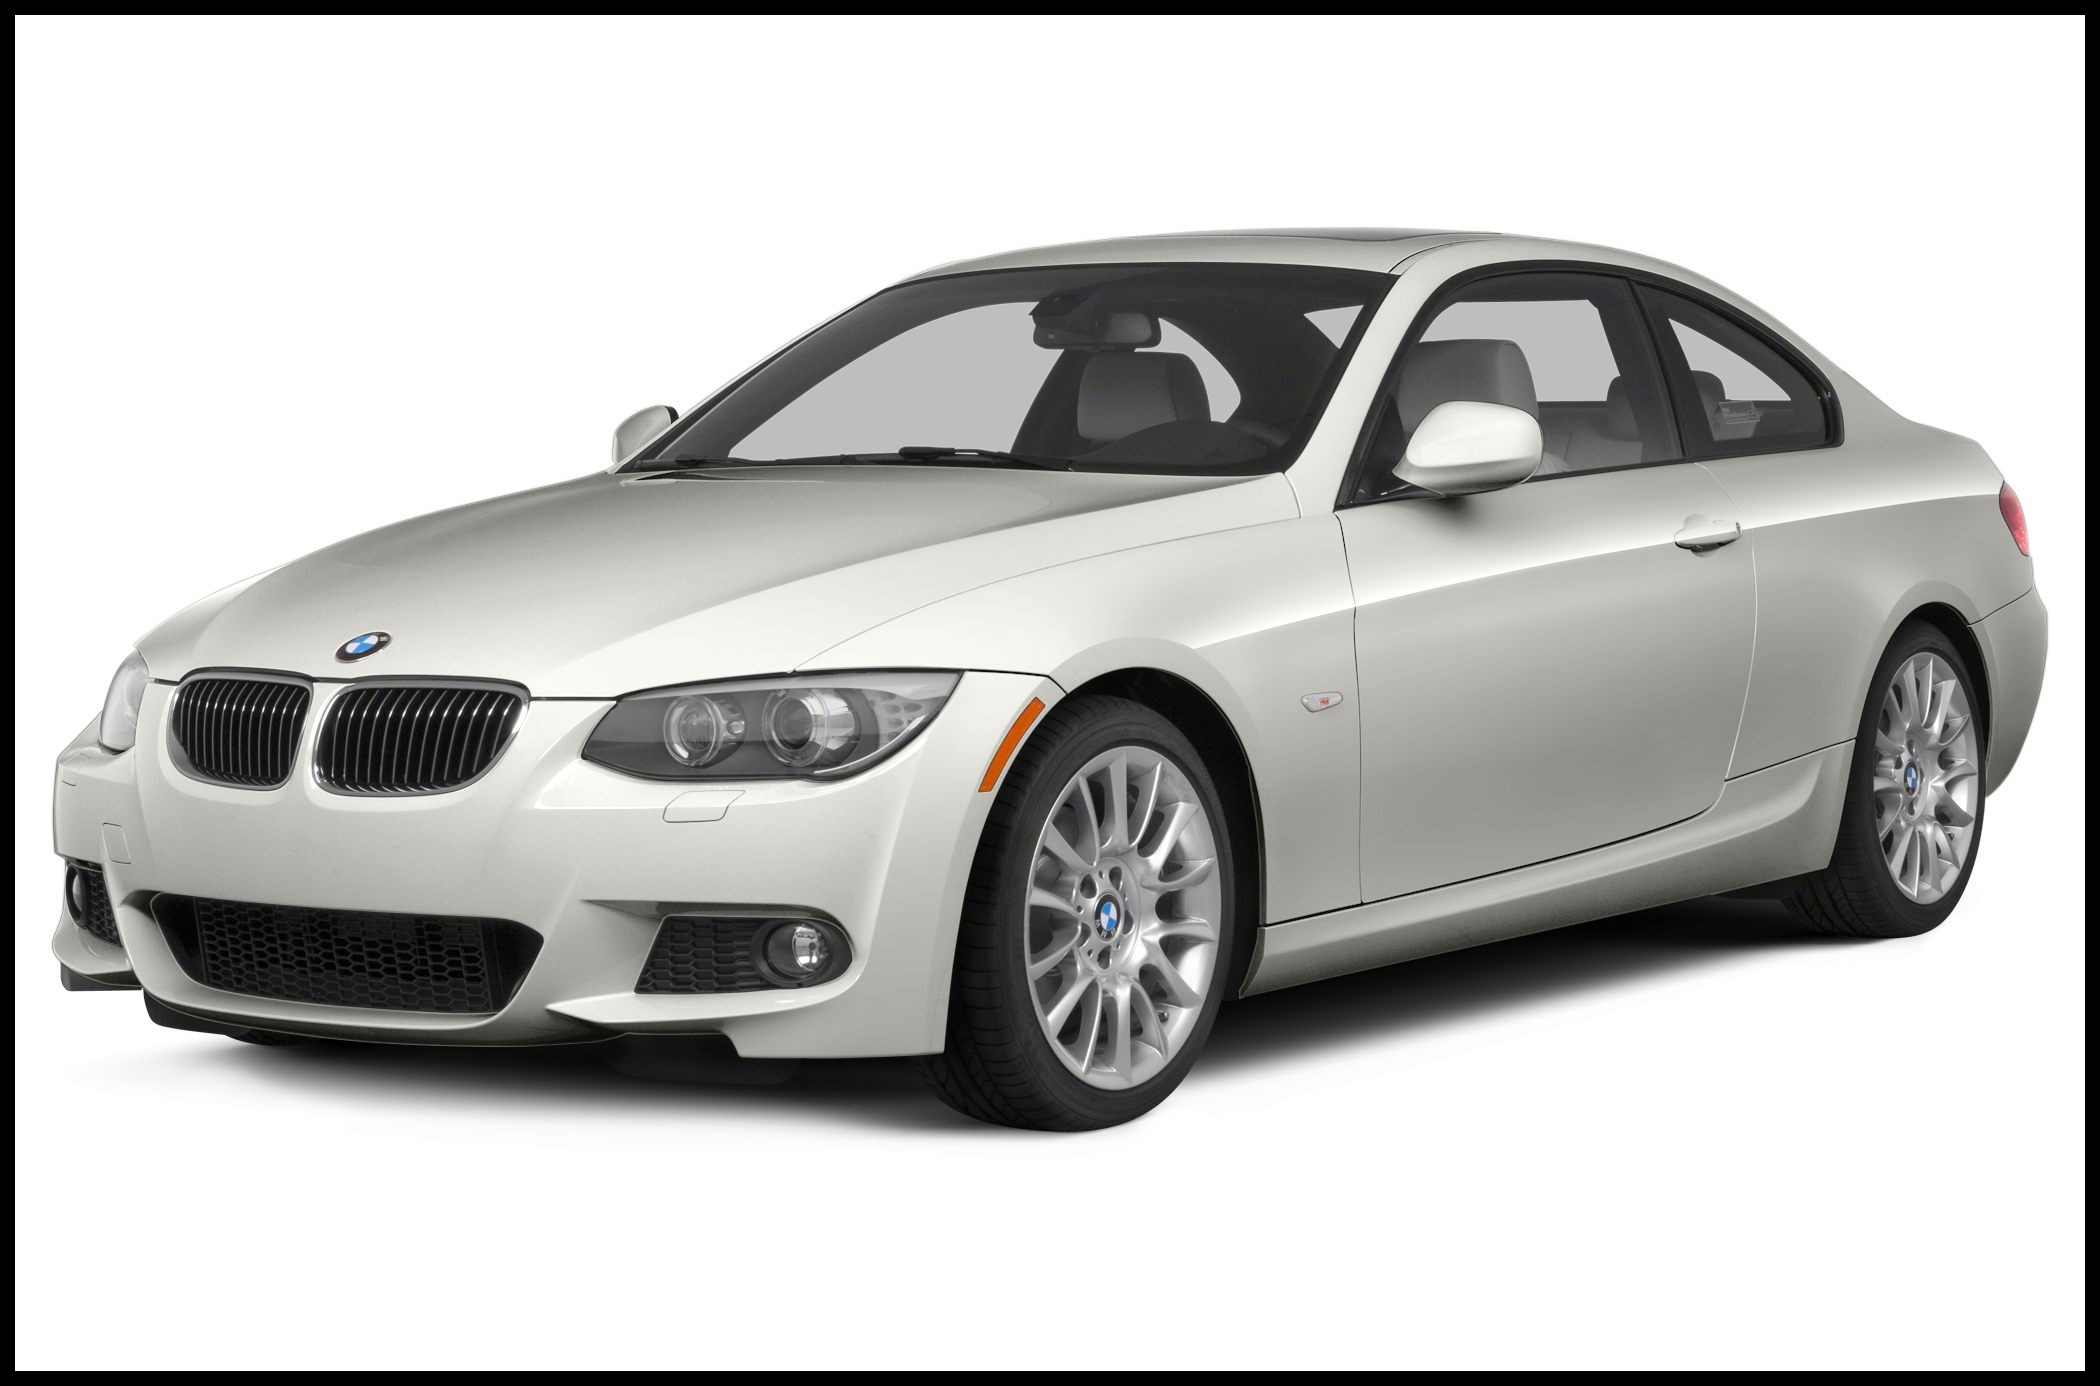 2011 Bmw 328i Xdrive Coupe Lovely 2013 Bmw 328 New Car Test Drive